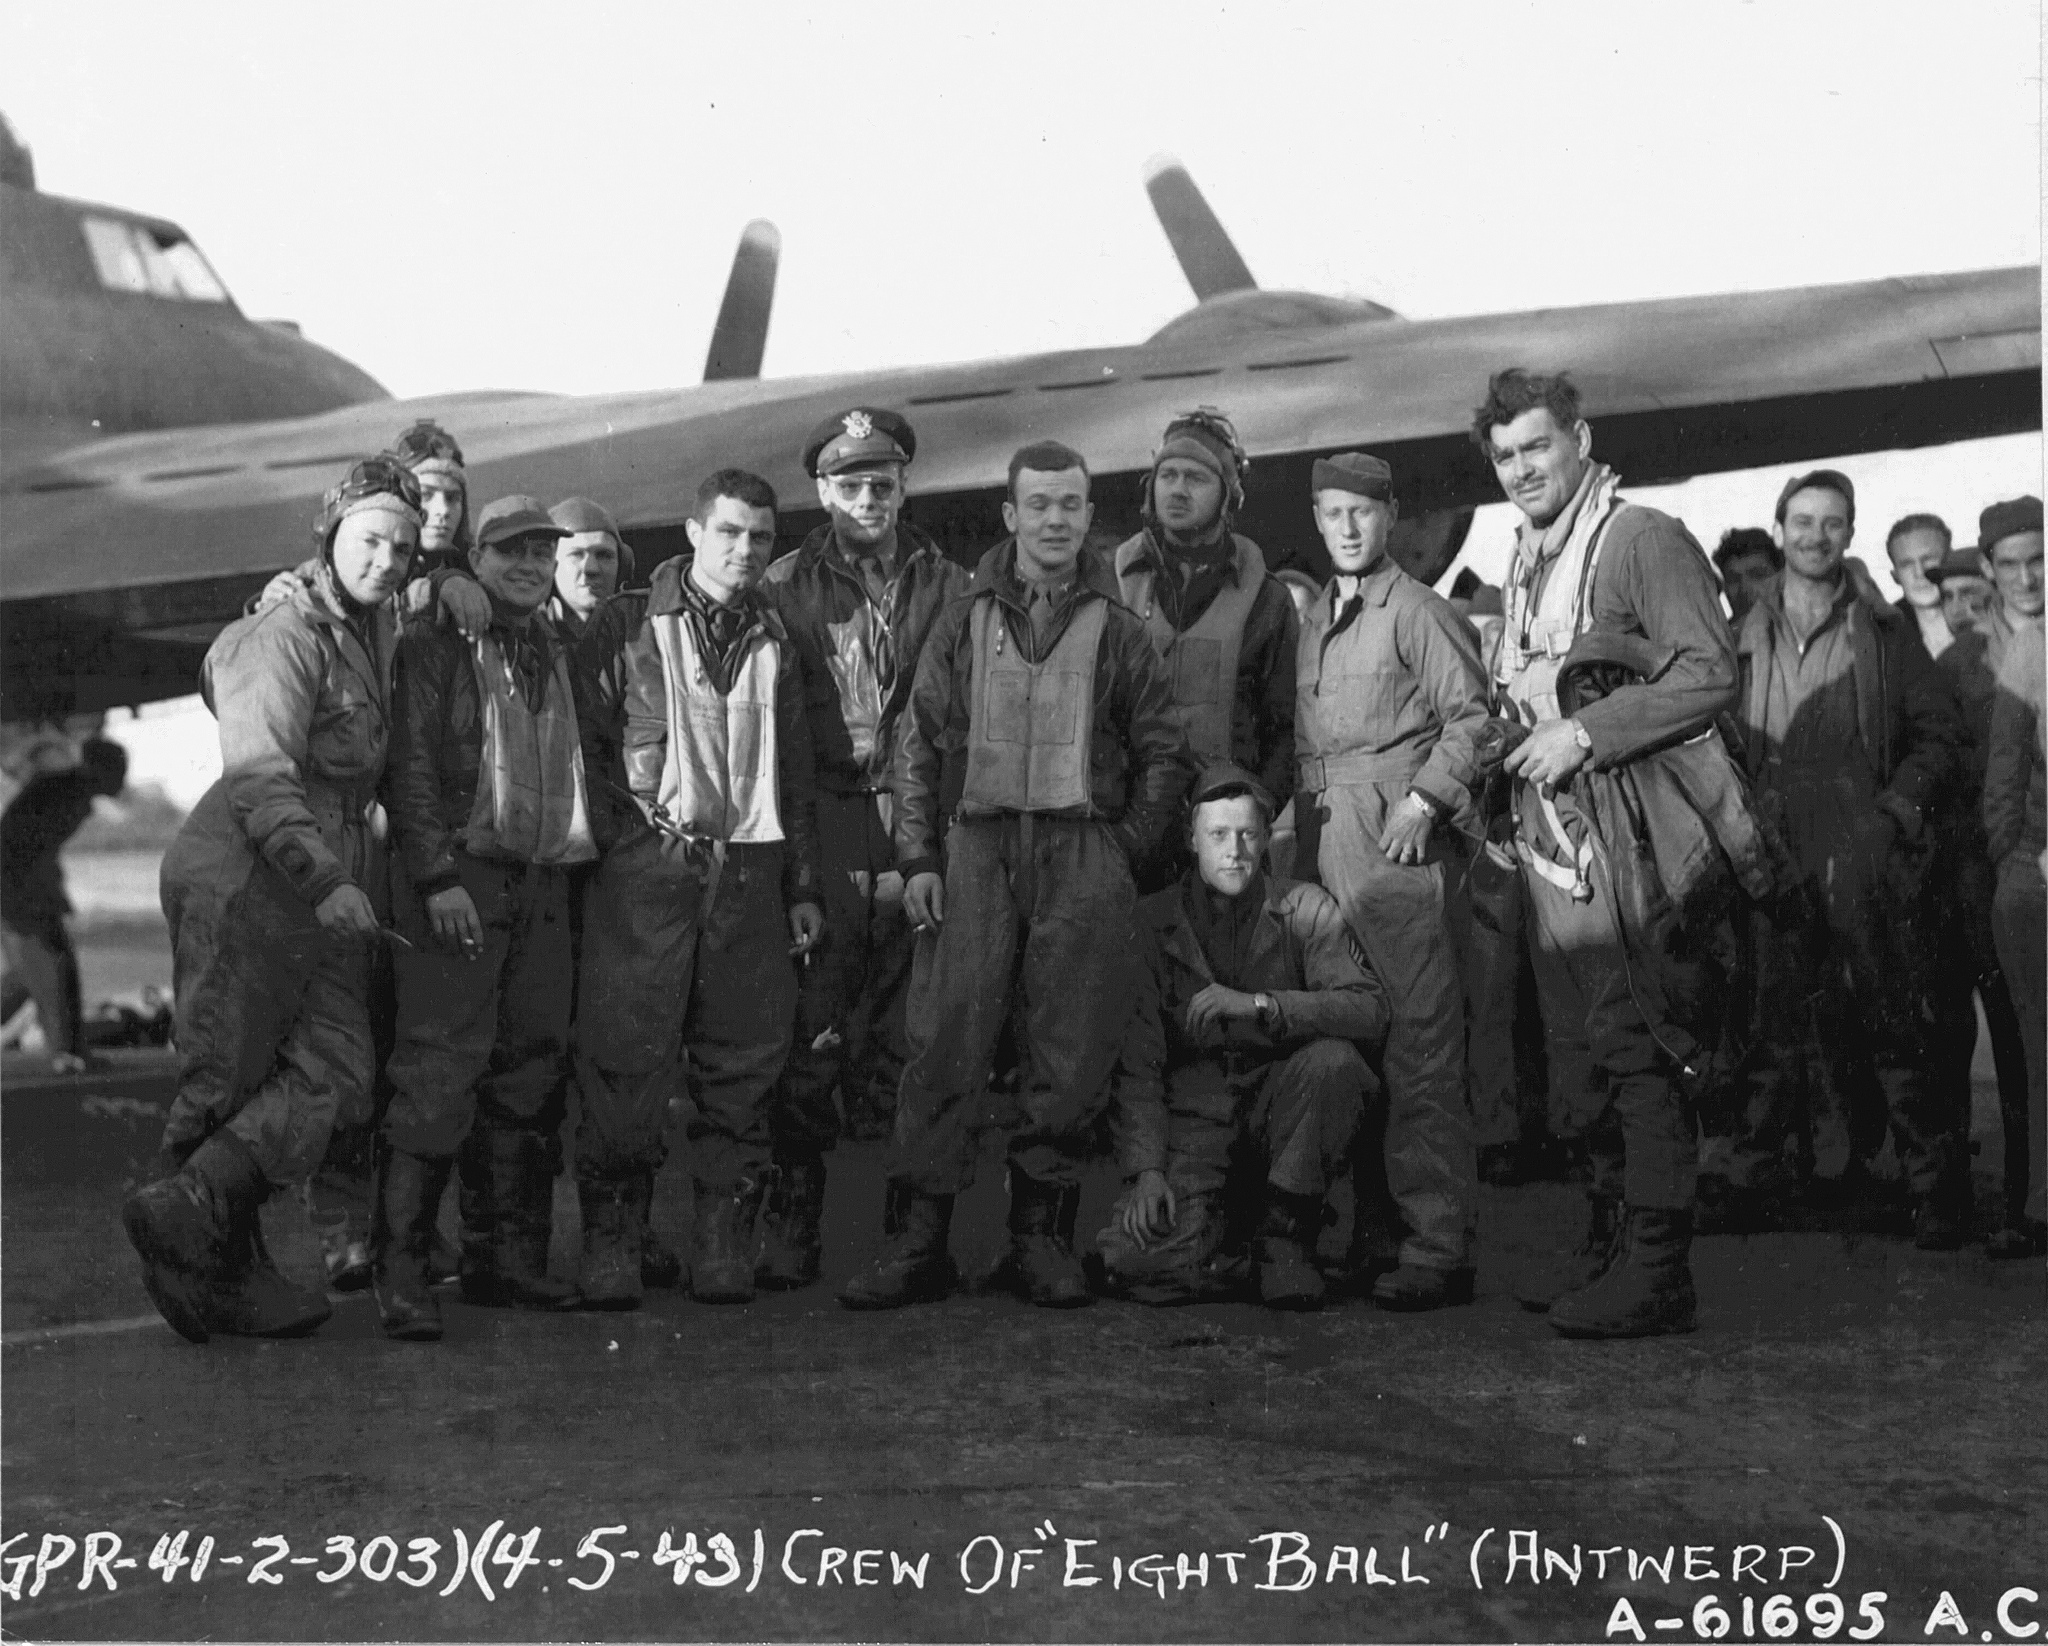 The crew of The 8 Ball Mk II, a Boeing B-17F-27-BO Flying Fortress, serial number 41-24635, 359th Bombardment Squadron, 303rd Bombardment Group (Heavy), following an attack against Antwerp, Belgium, 5 April 1943. (U.S. Air Force)